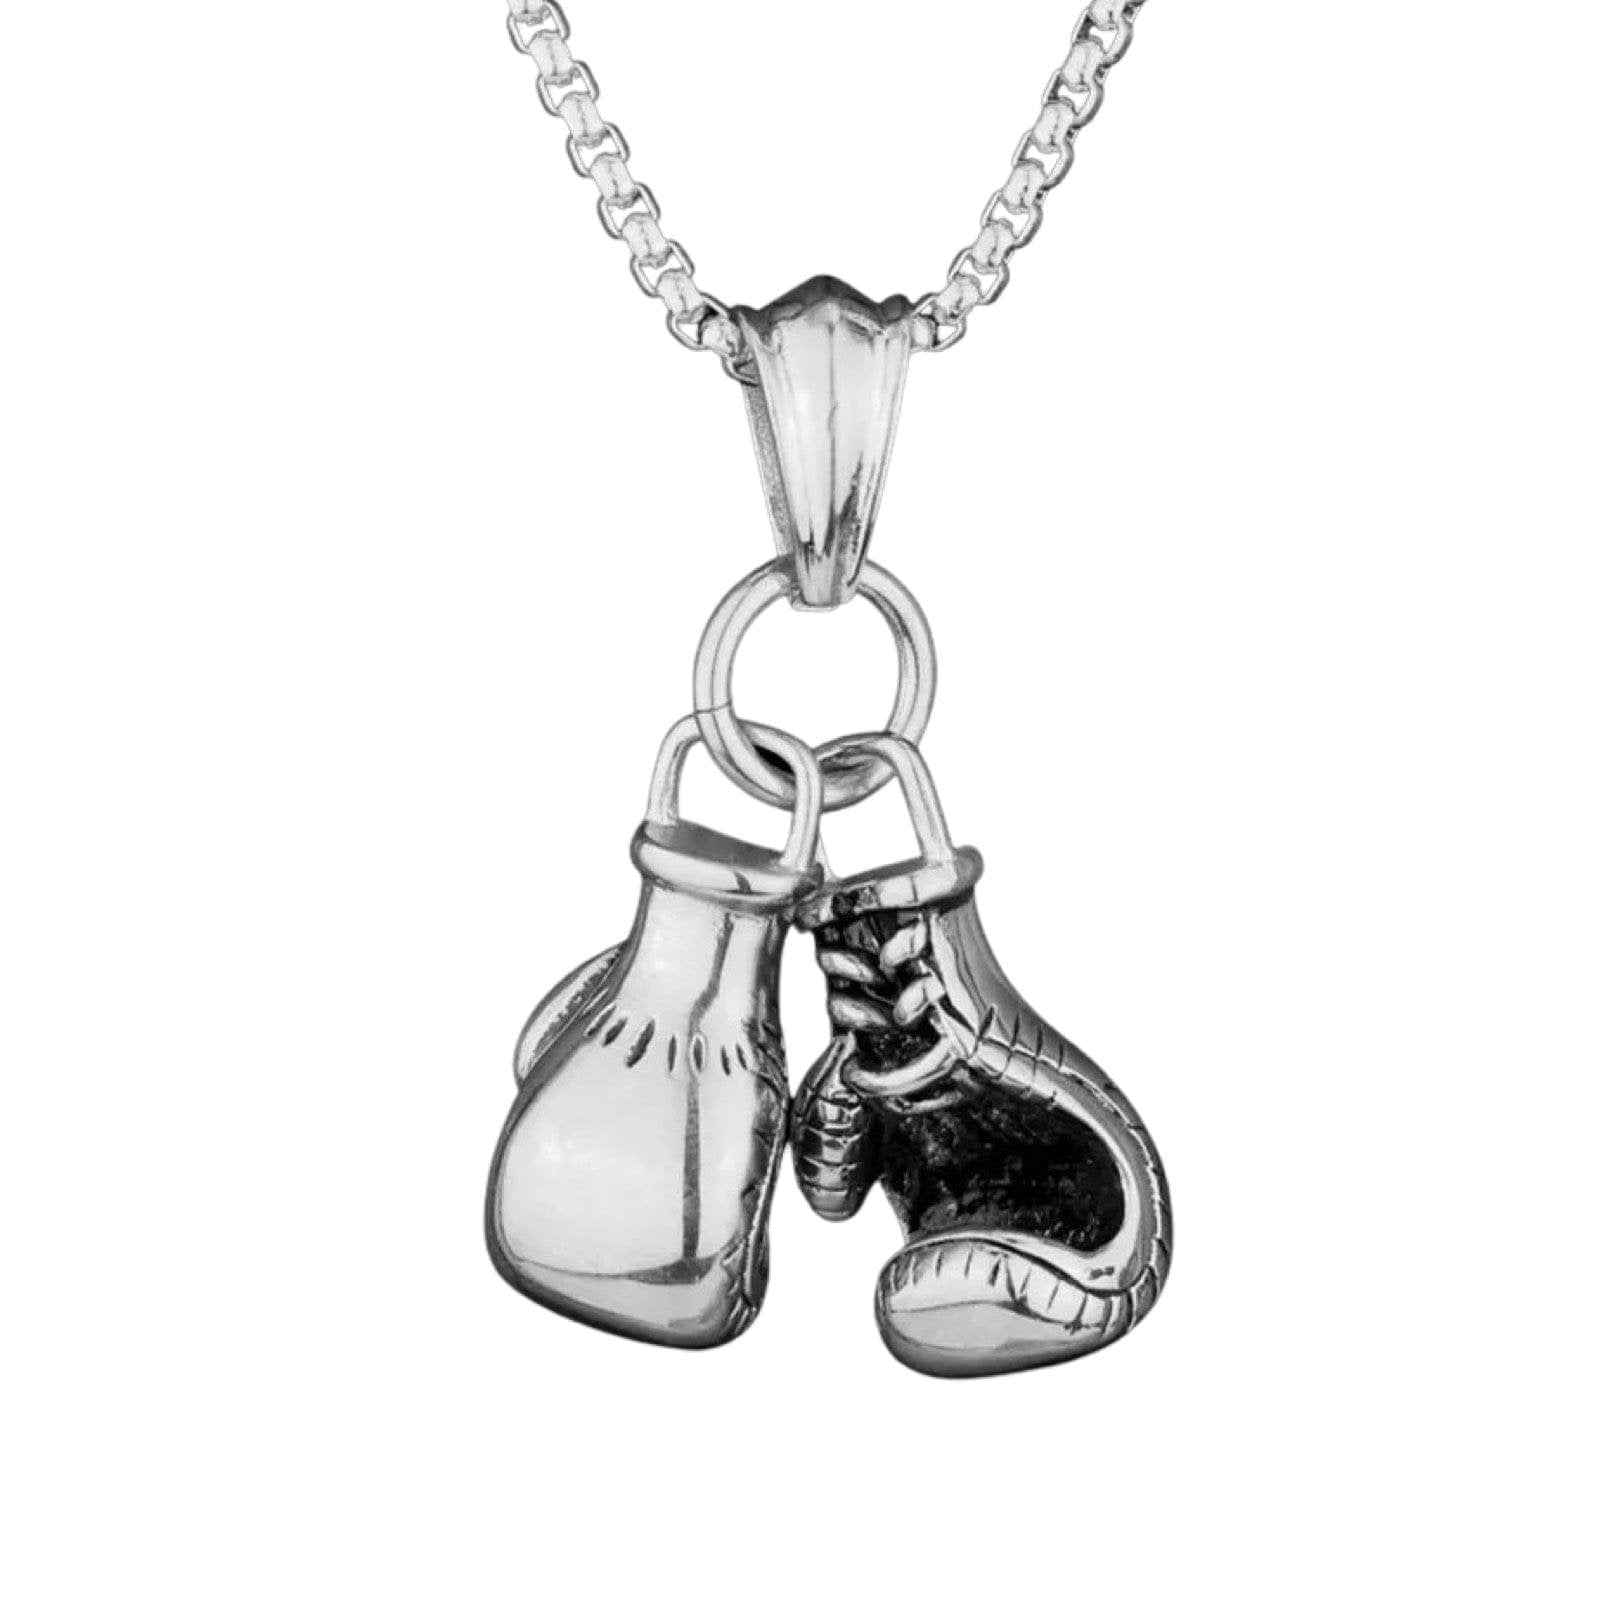 Boxing Gloves Pendant and Chain Necklace-SLVR-BXG-GLVS-24